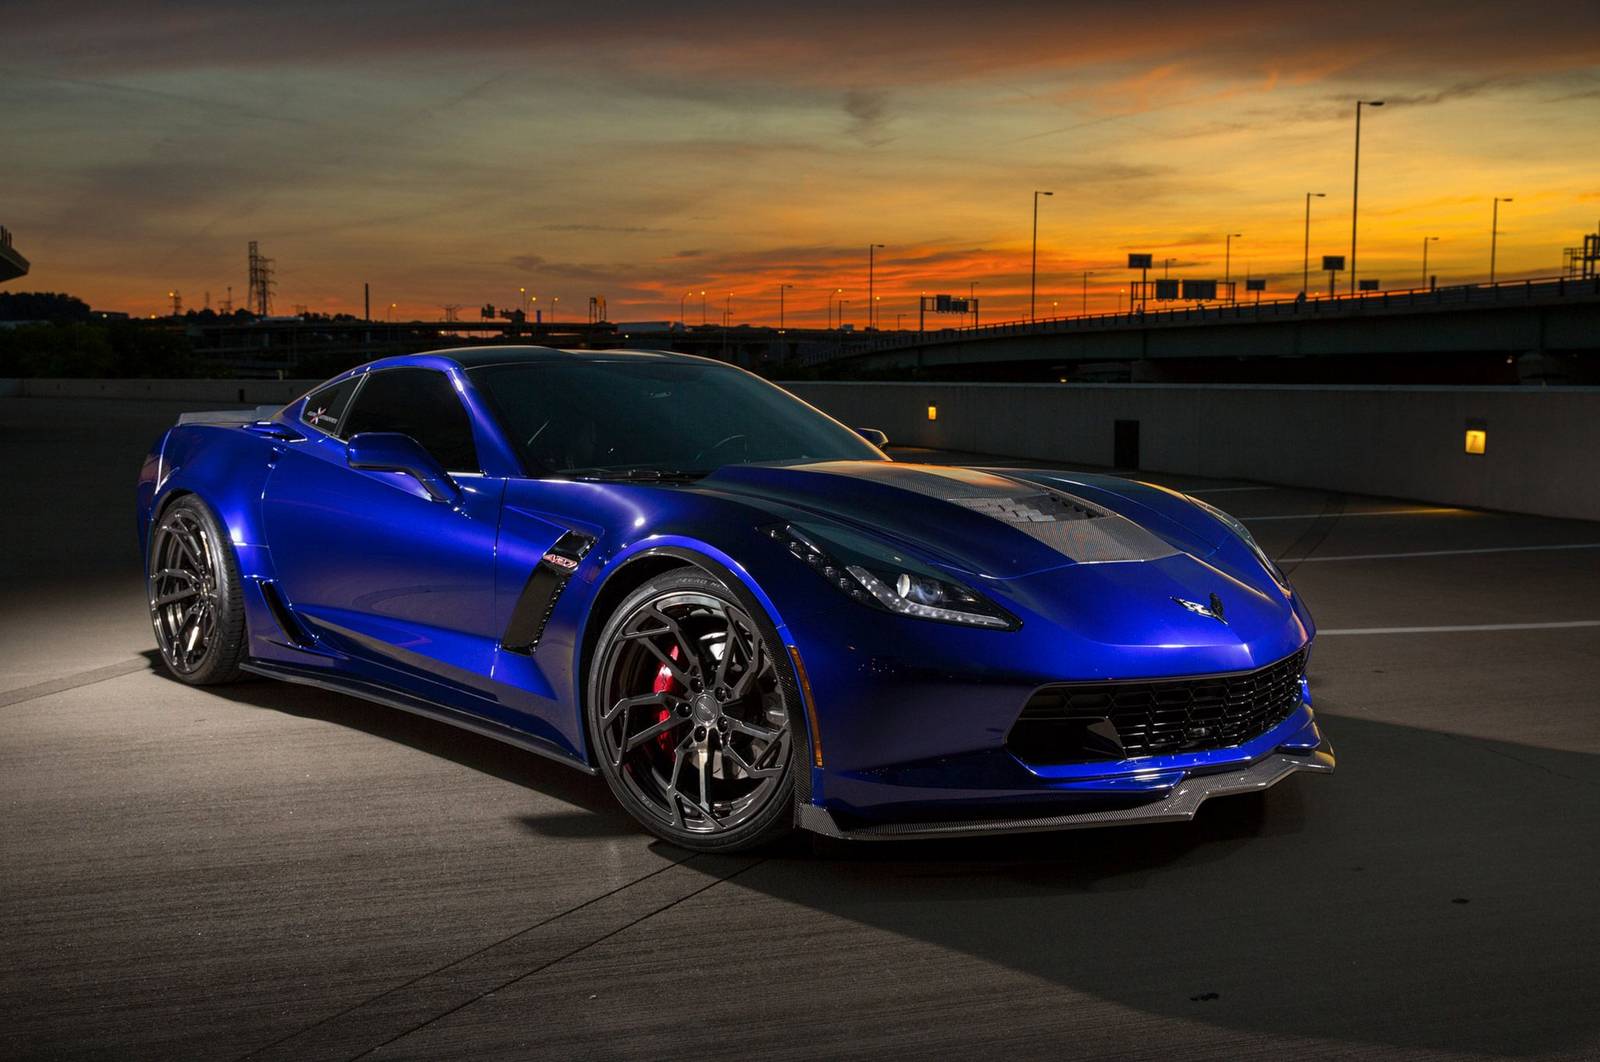 The Deadly Weapon Chevy Corvette 1000 Hp By Weapon X Motorsports